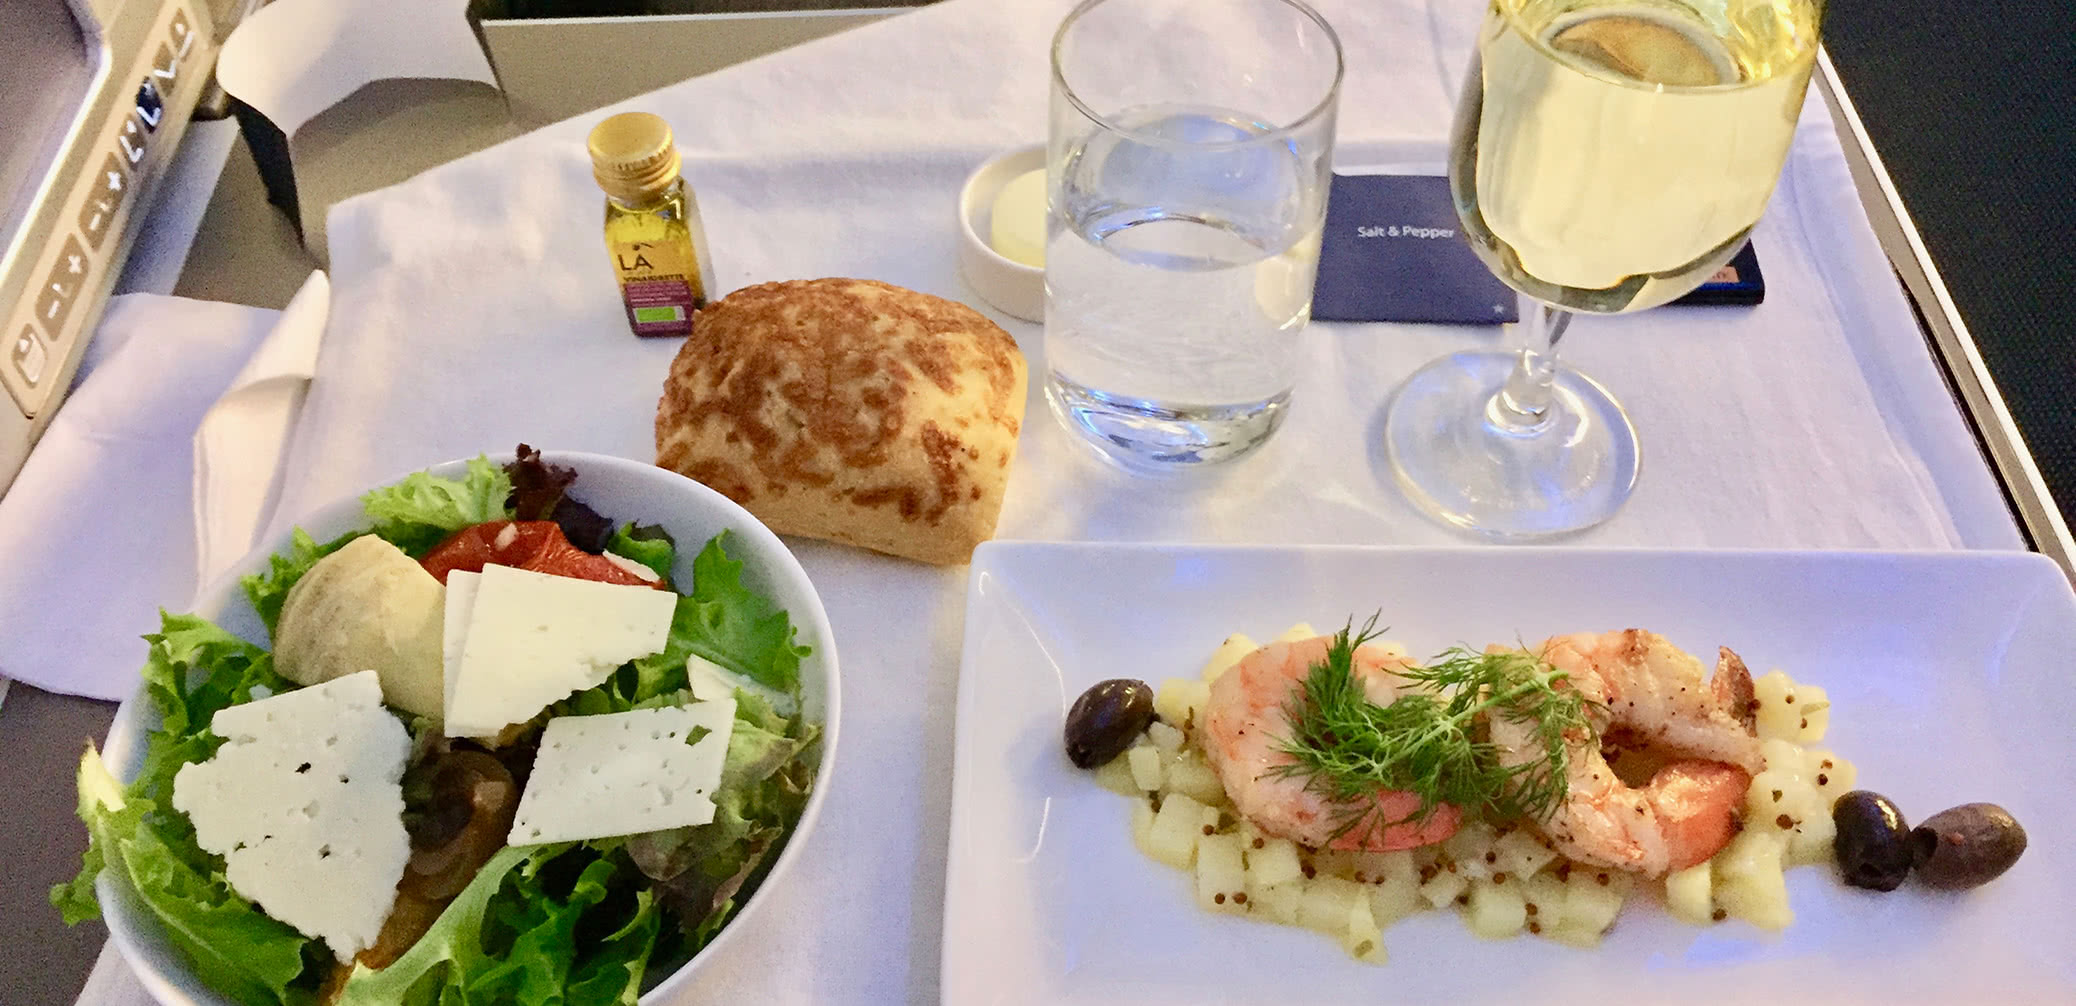 flight-review-british-airways-a380-business-class-hkg-to-lhrflight-review-british-airways-a380-business-class-hkg-to-lhr